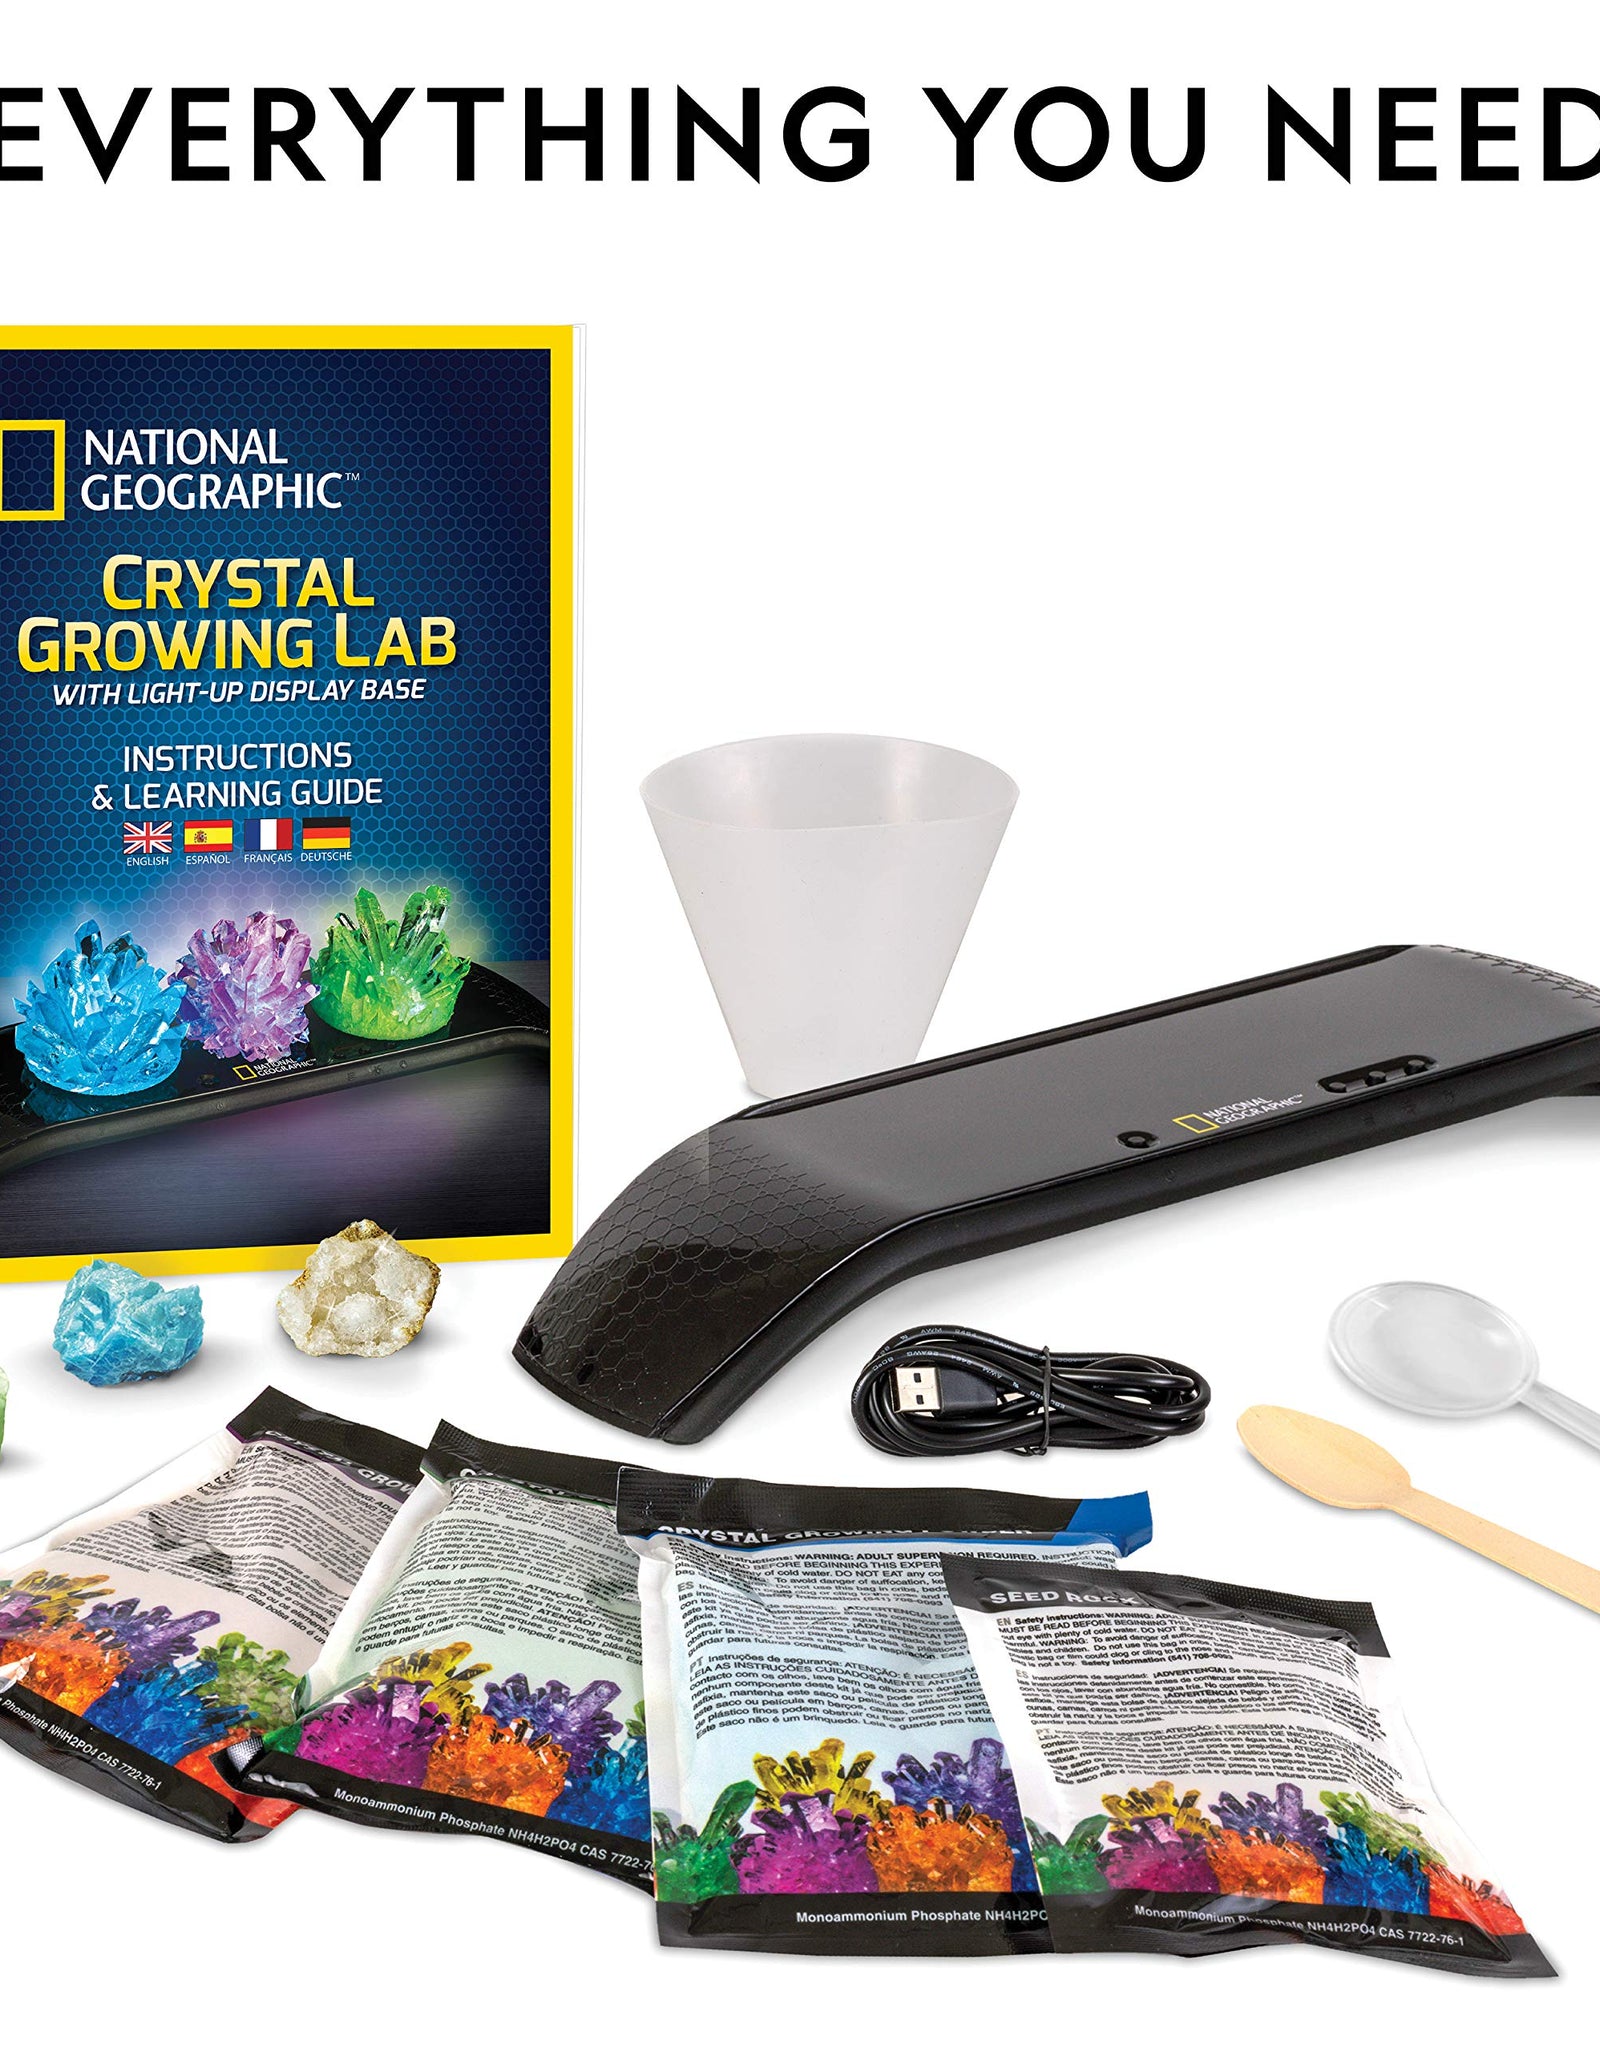 NATIONAL GEOGRAPHIC Crystal Growing Kit - 3 Vibrant Colored Crystals to Grow with Light-Up Display Stand & Guidebook, Includes 3 Real Gemstone Specimens Including A Geode & Green Fluorite